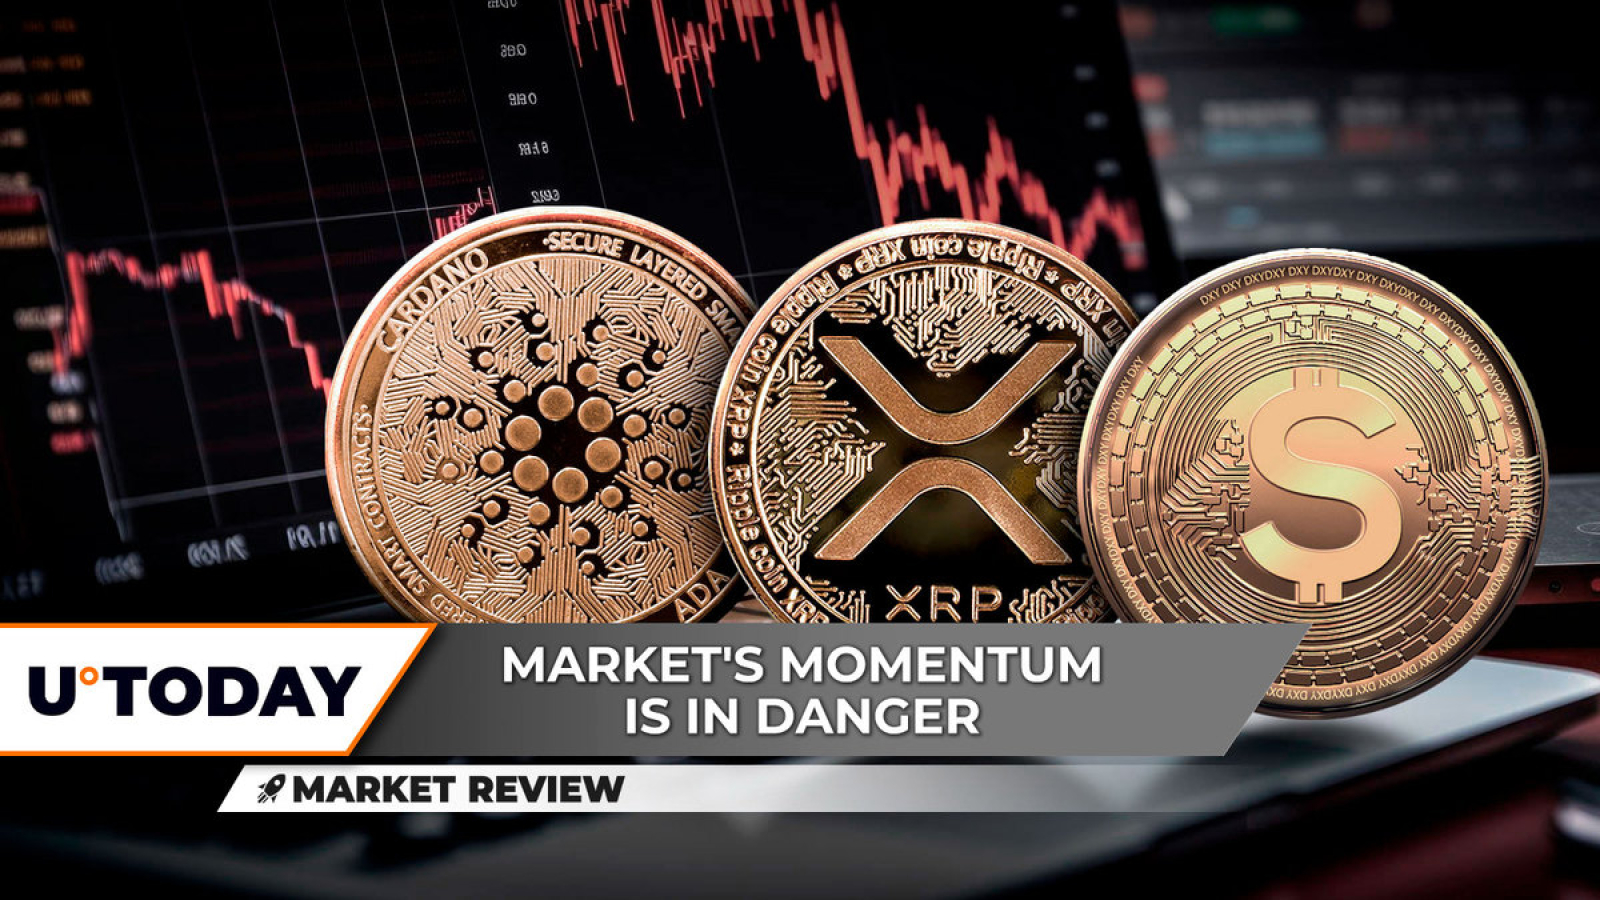 Cardano (ADA) Brutally Rejected, DXY Push to Kill Crypto Market’s Momentum, Is XRP Reversal Starting?